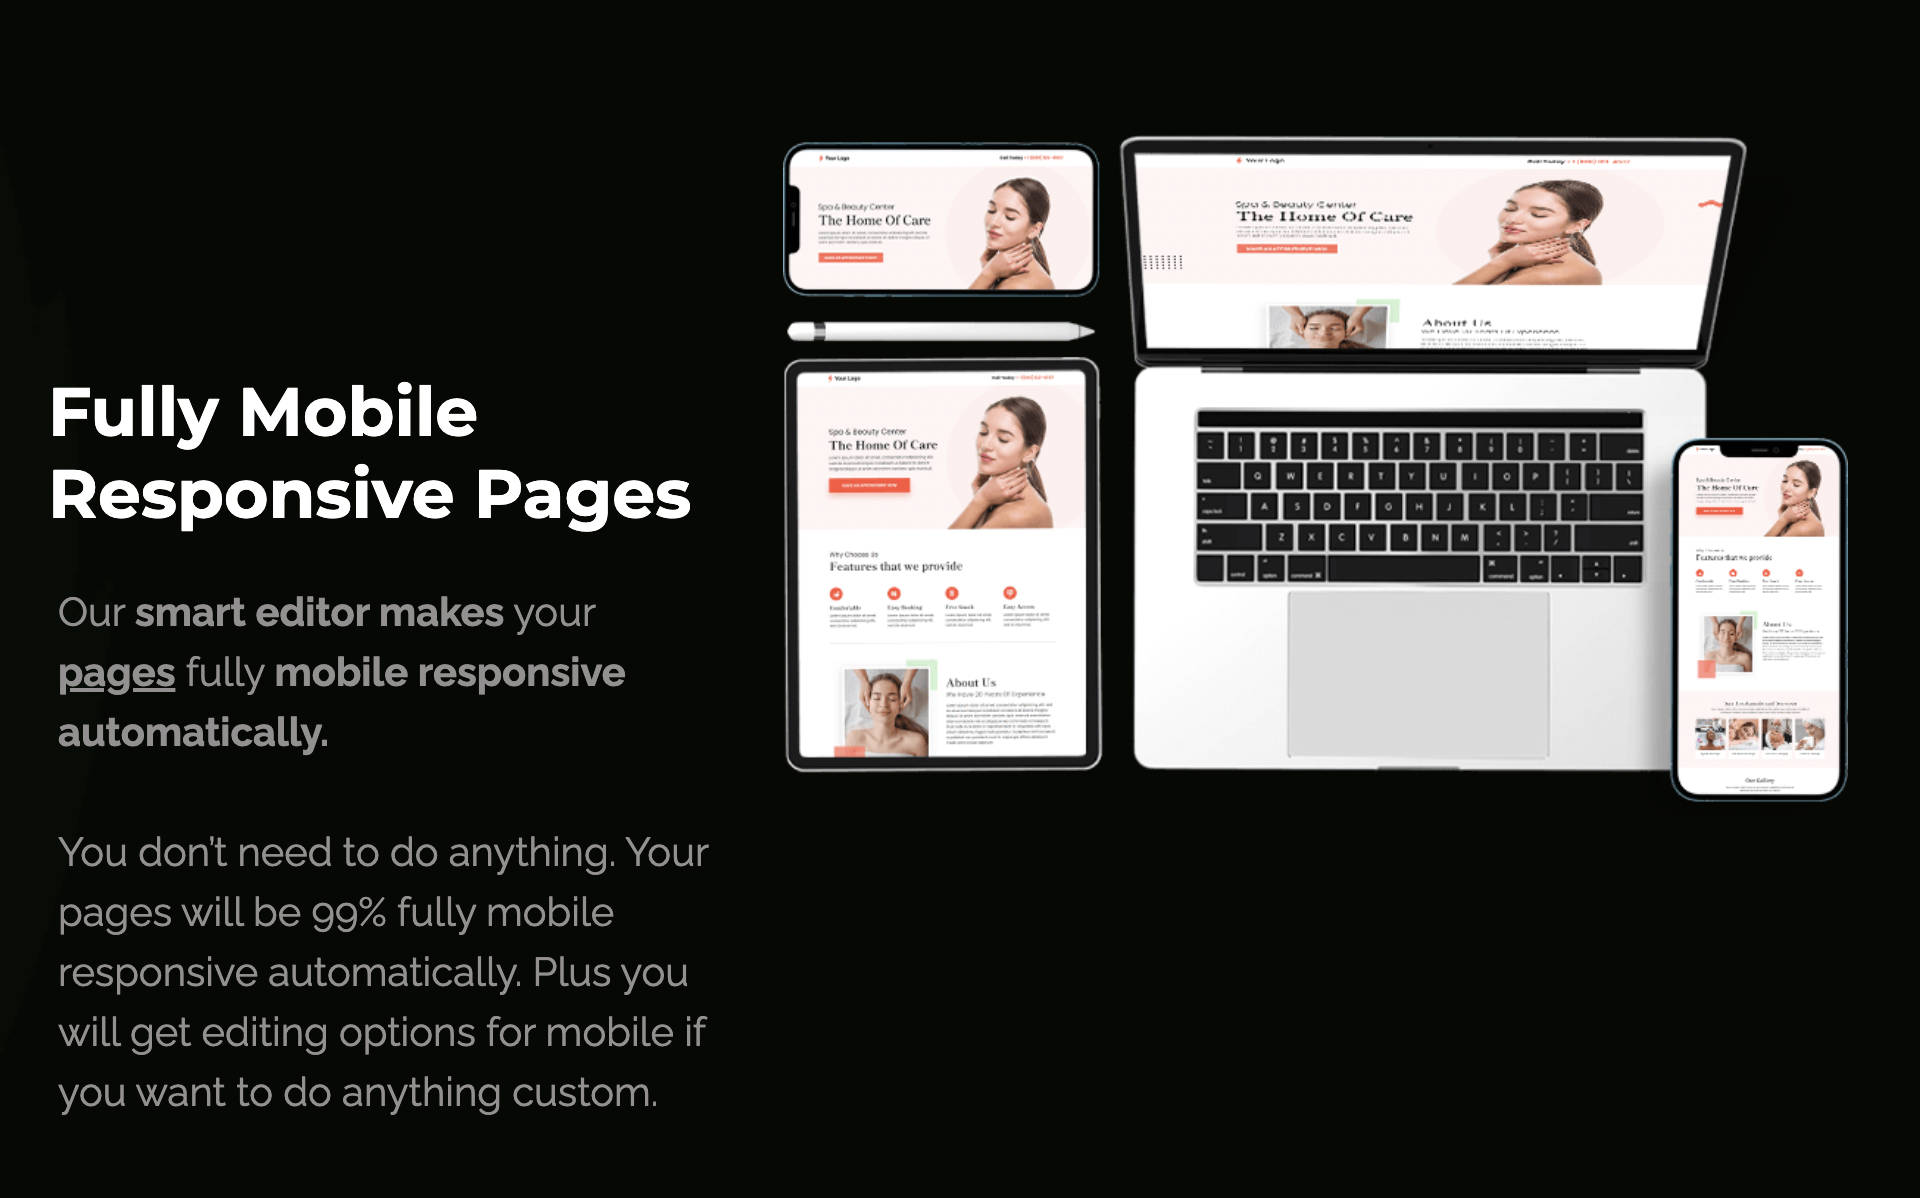 Fully Mobile Responsive Pages